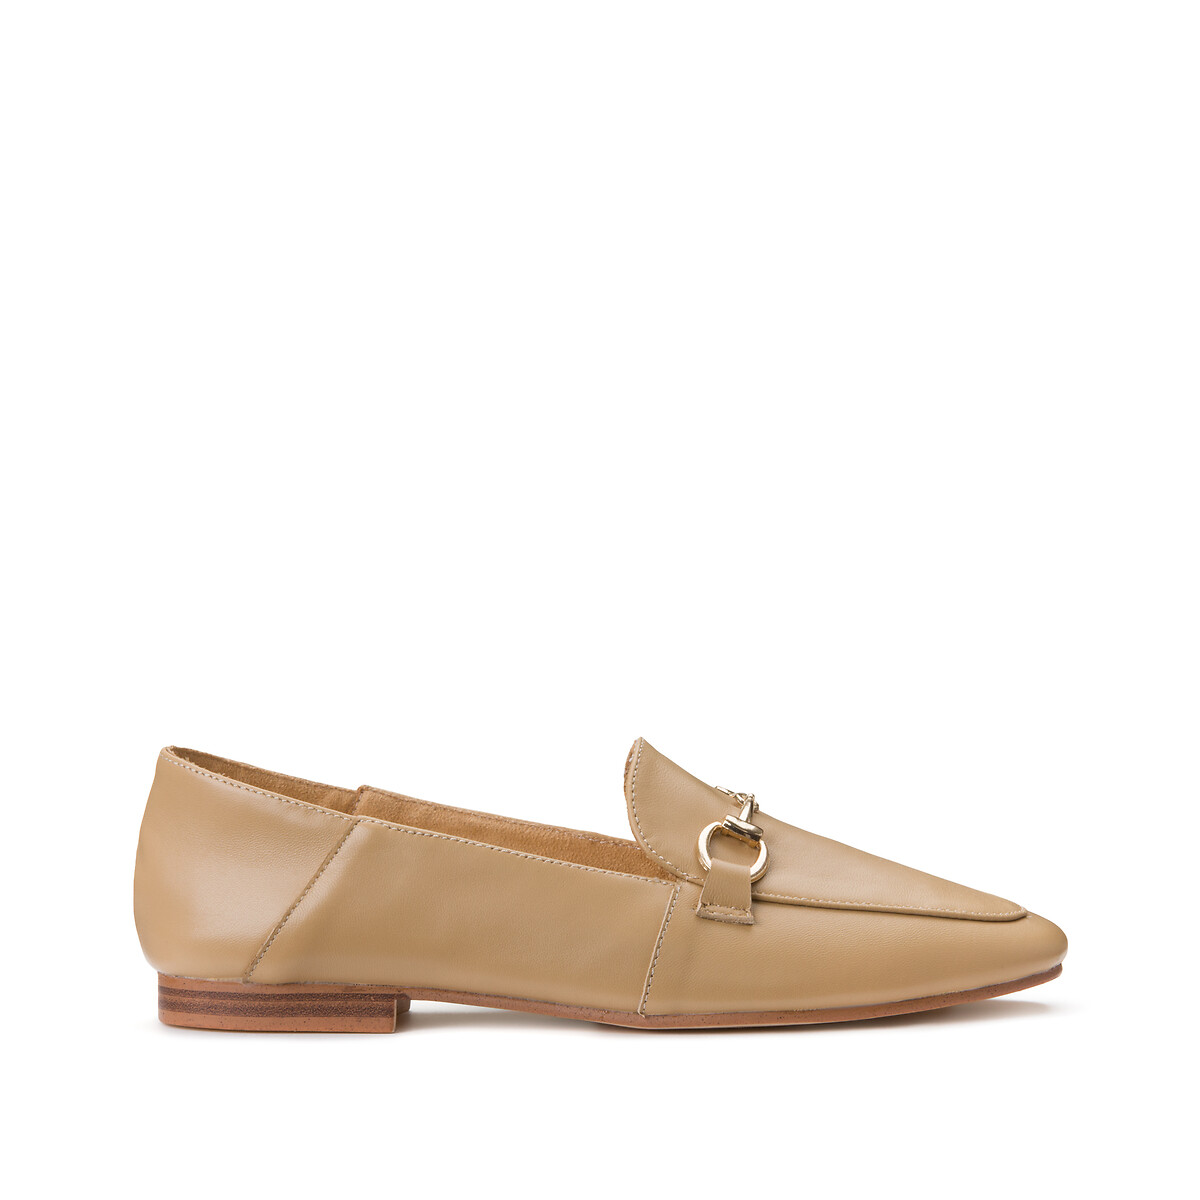 Leather babouche loafers La Redoute Collections | La Redoute